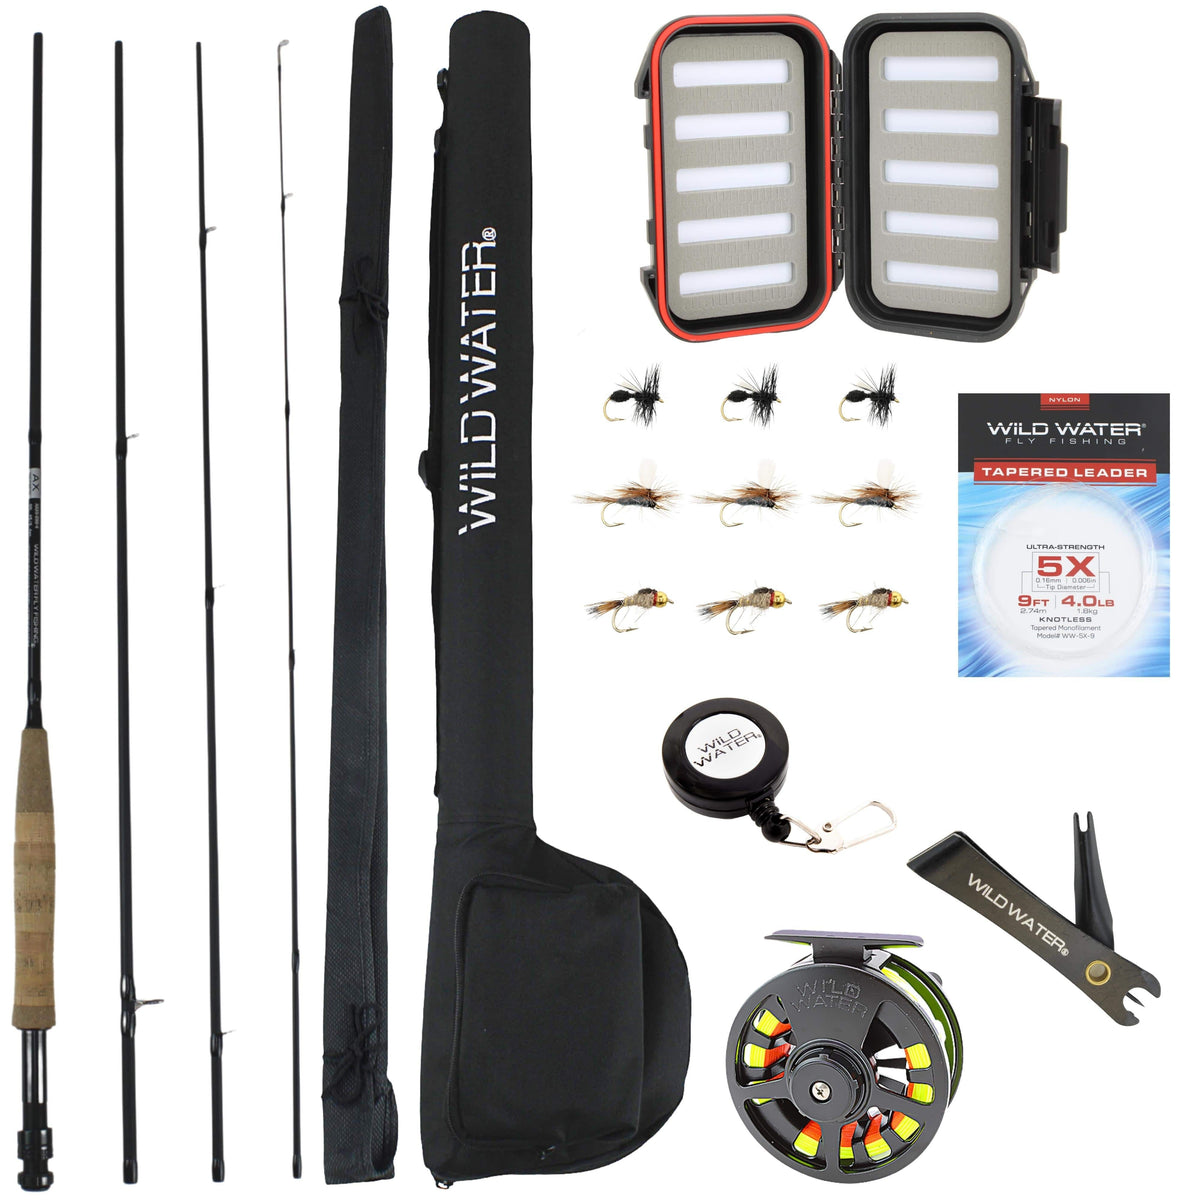 5 Pieces Fishing Rod and Reels